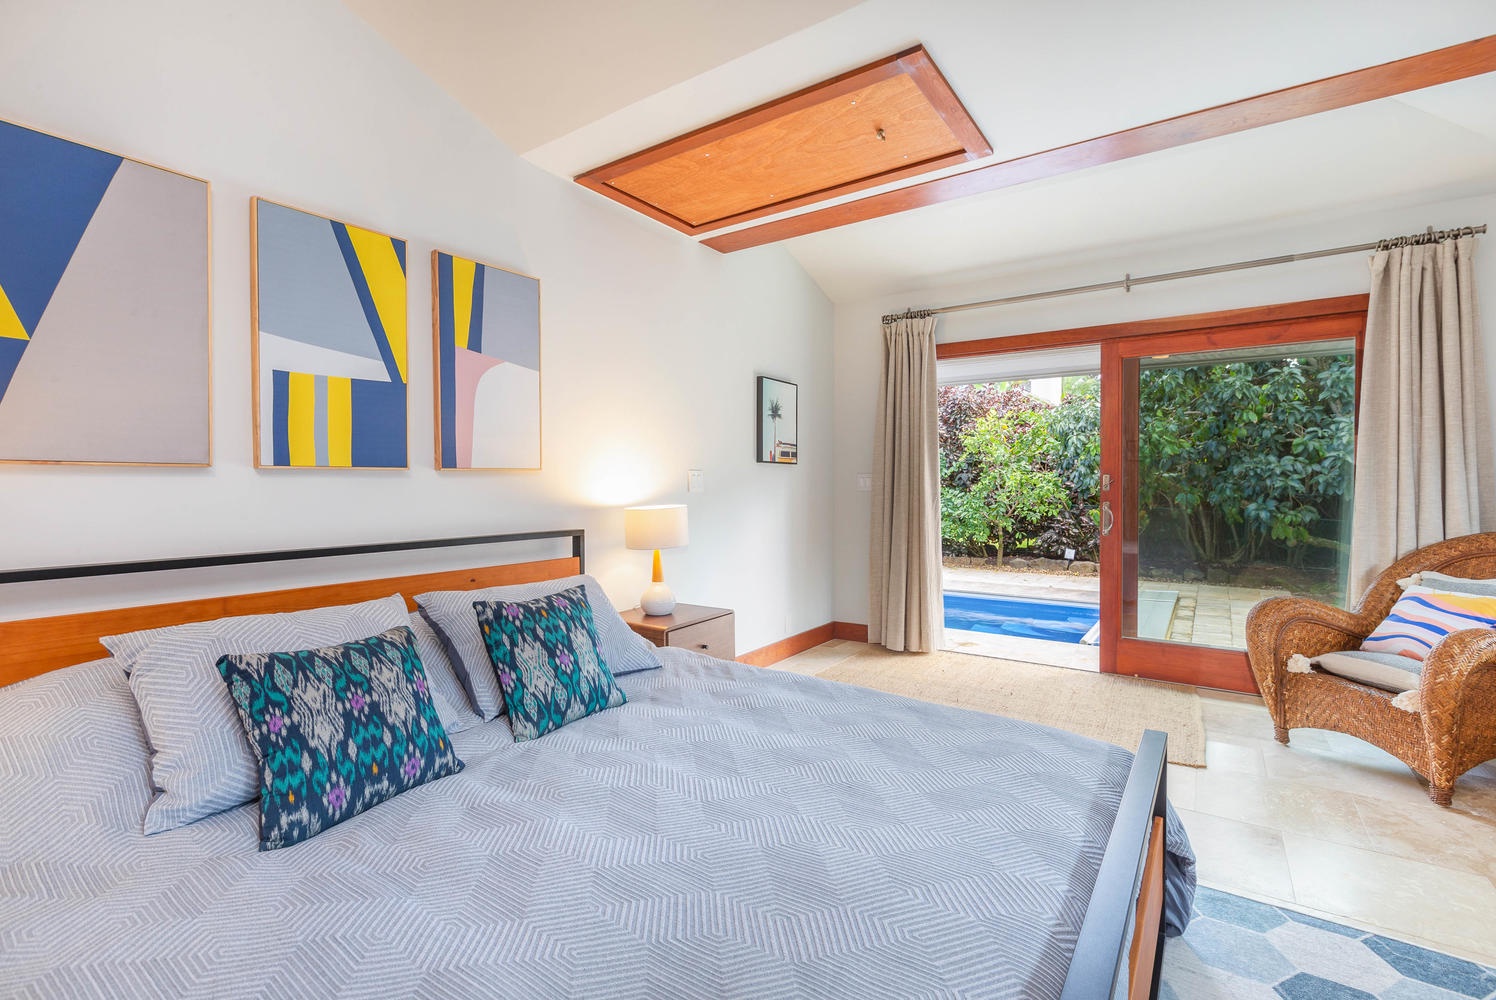 Princeville Vacation Rentals, Makana Lei - Bedroom two also has pool access